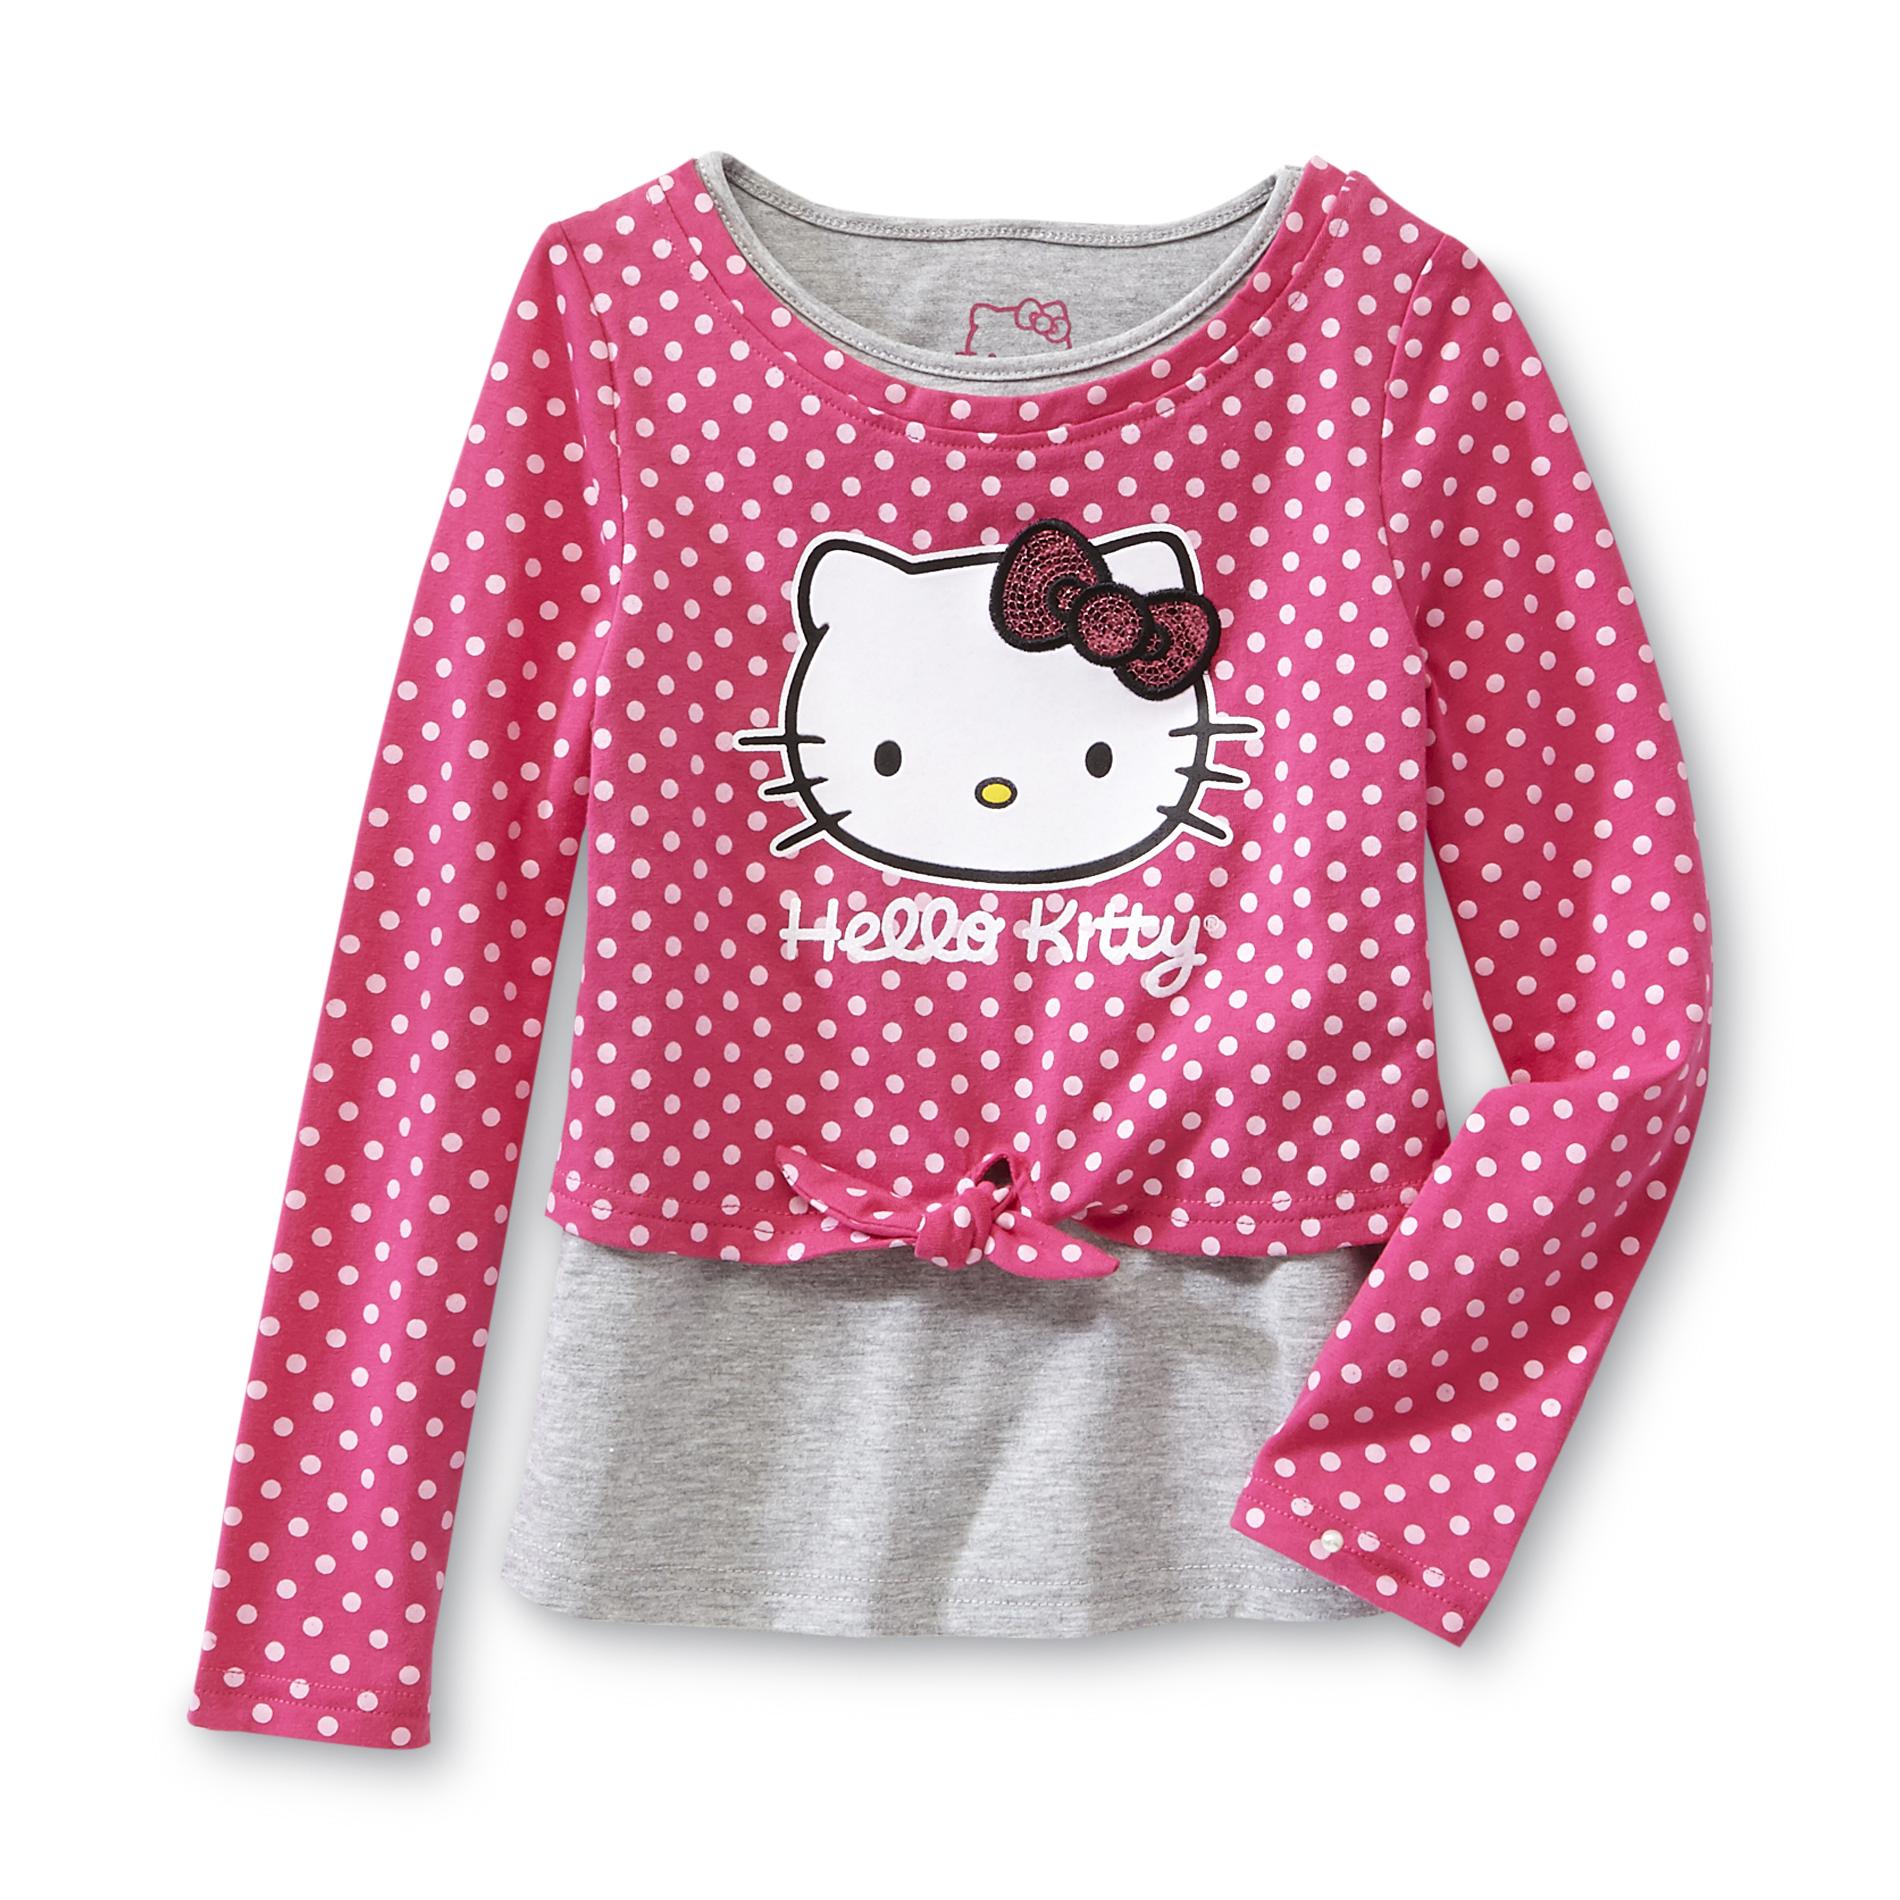 Hello Kitty Toddler Girl's Layered Look Tie-Front Top